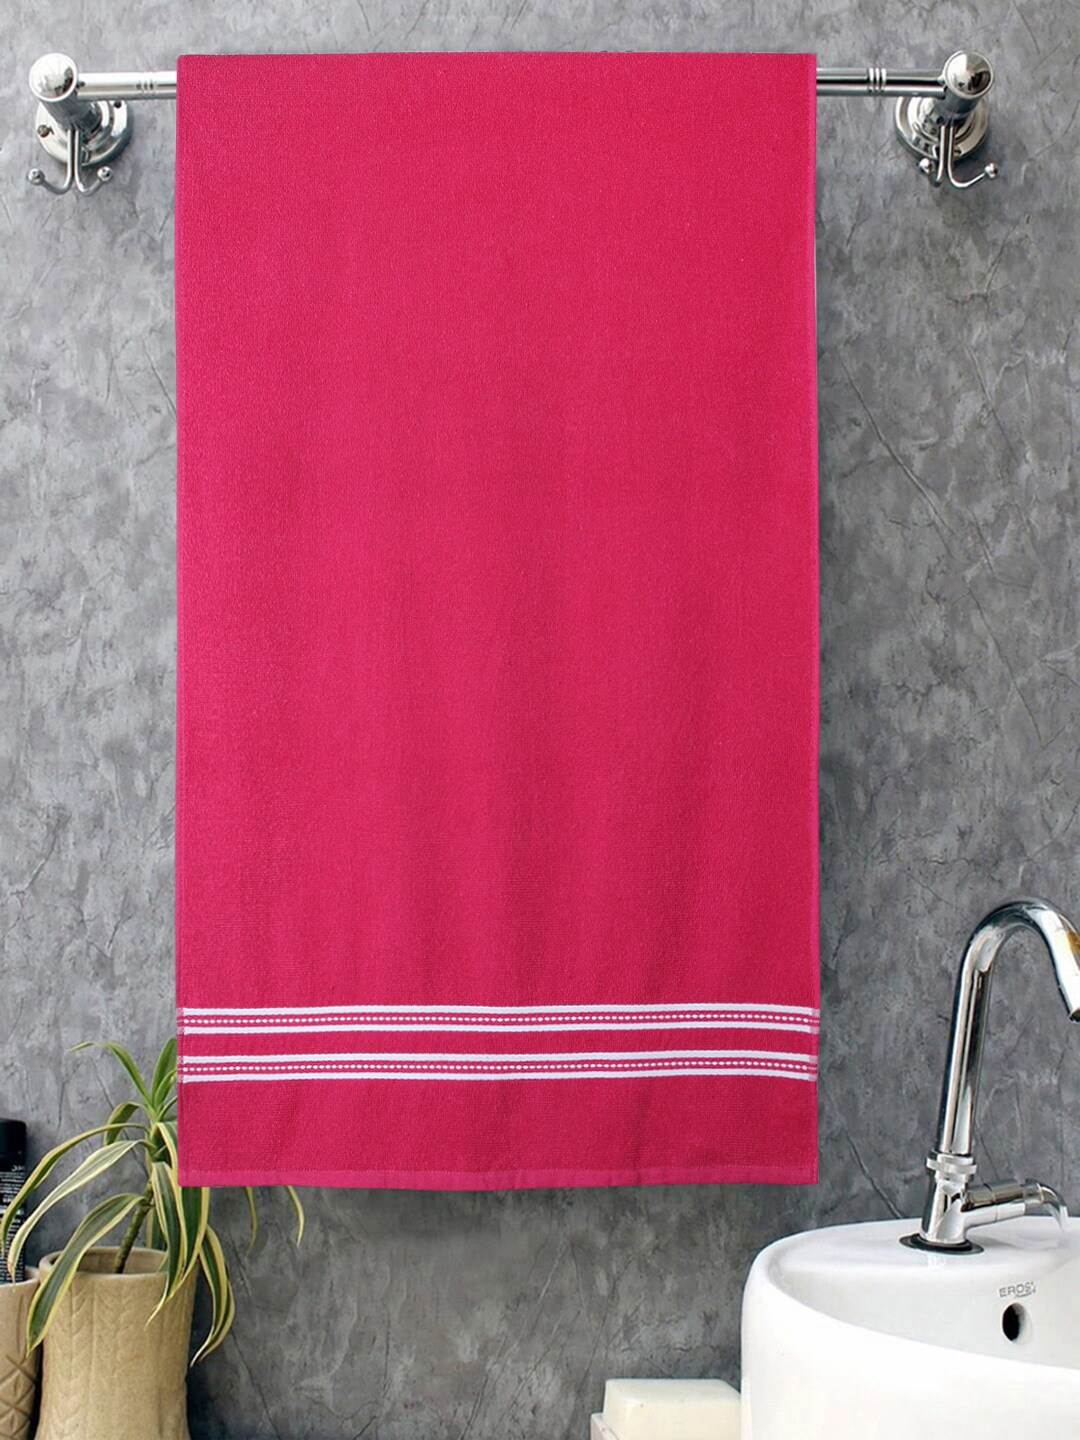 ROMEE Set Of 2 Pink & Navy Blue Solid 500 GSM Cotton Bath Towels Price in India